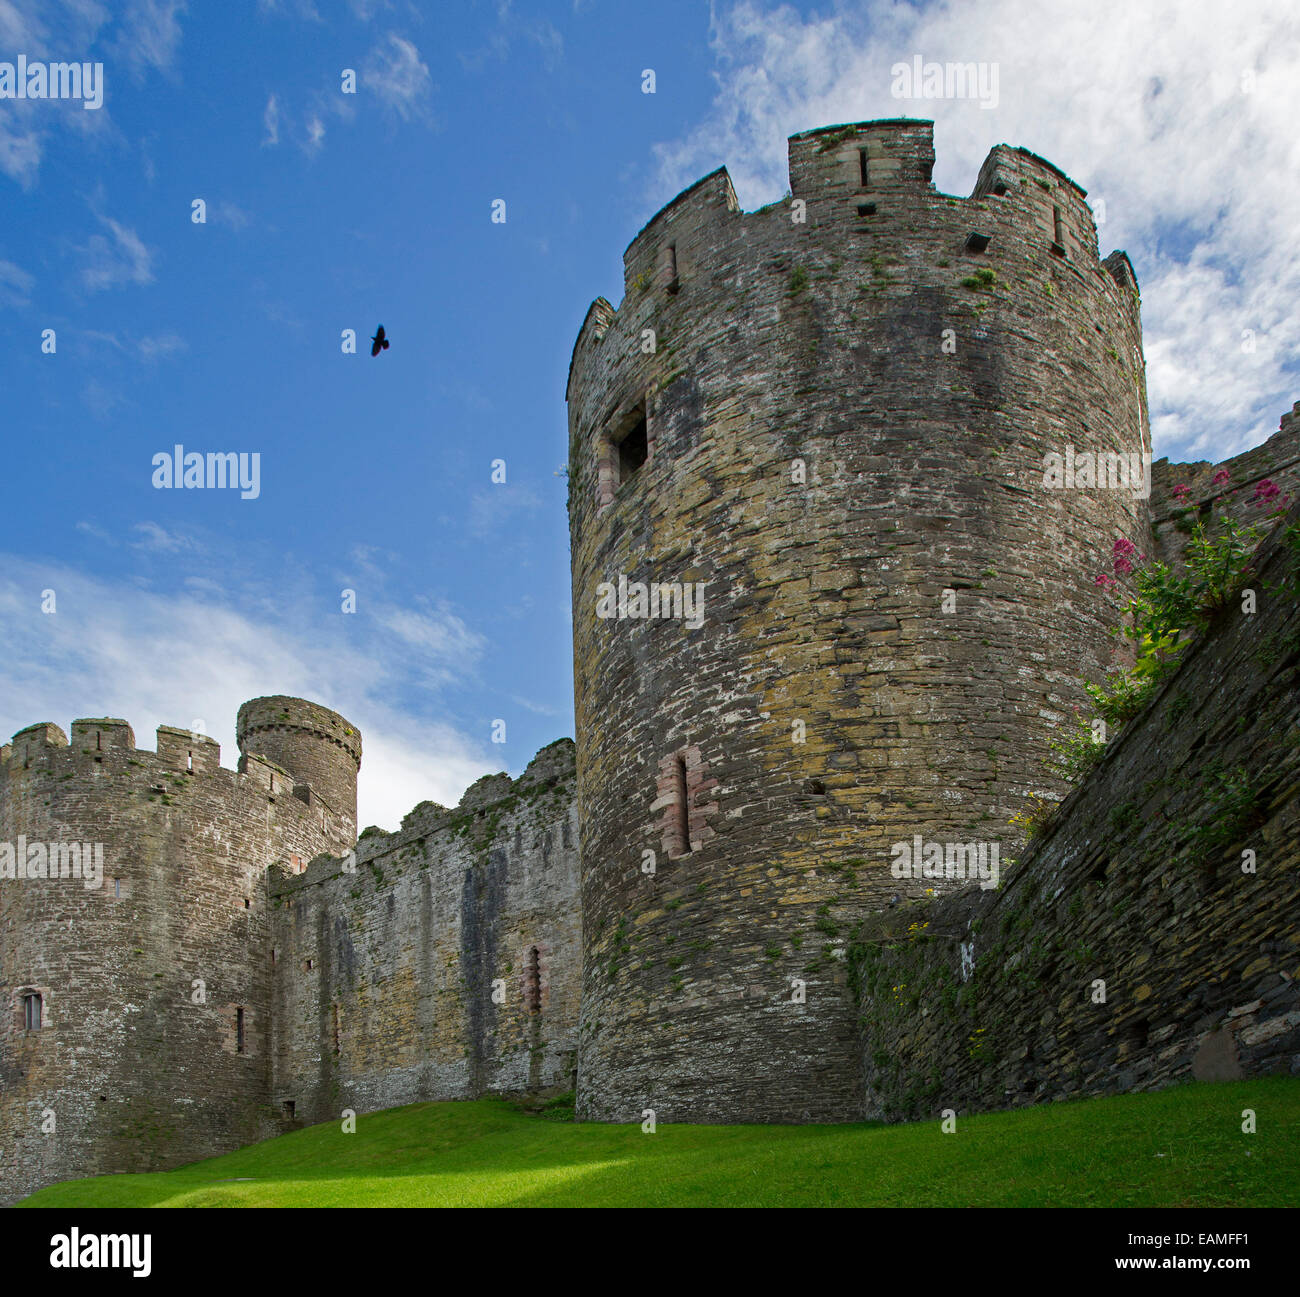 Historic 13th century Conwy castle in Wales with huge round towers spearing into blue sky streaked with clouds Stock Photo